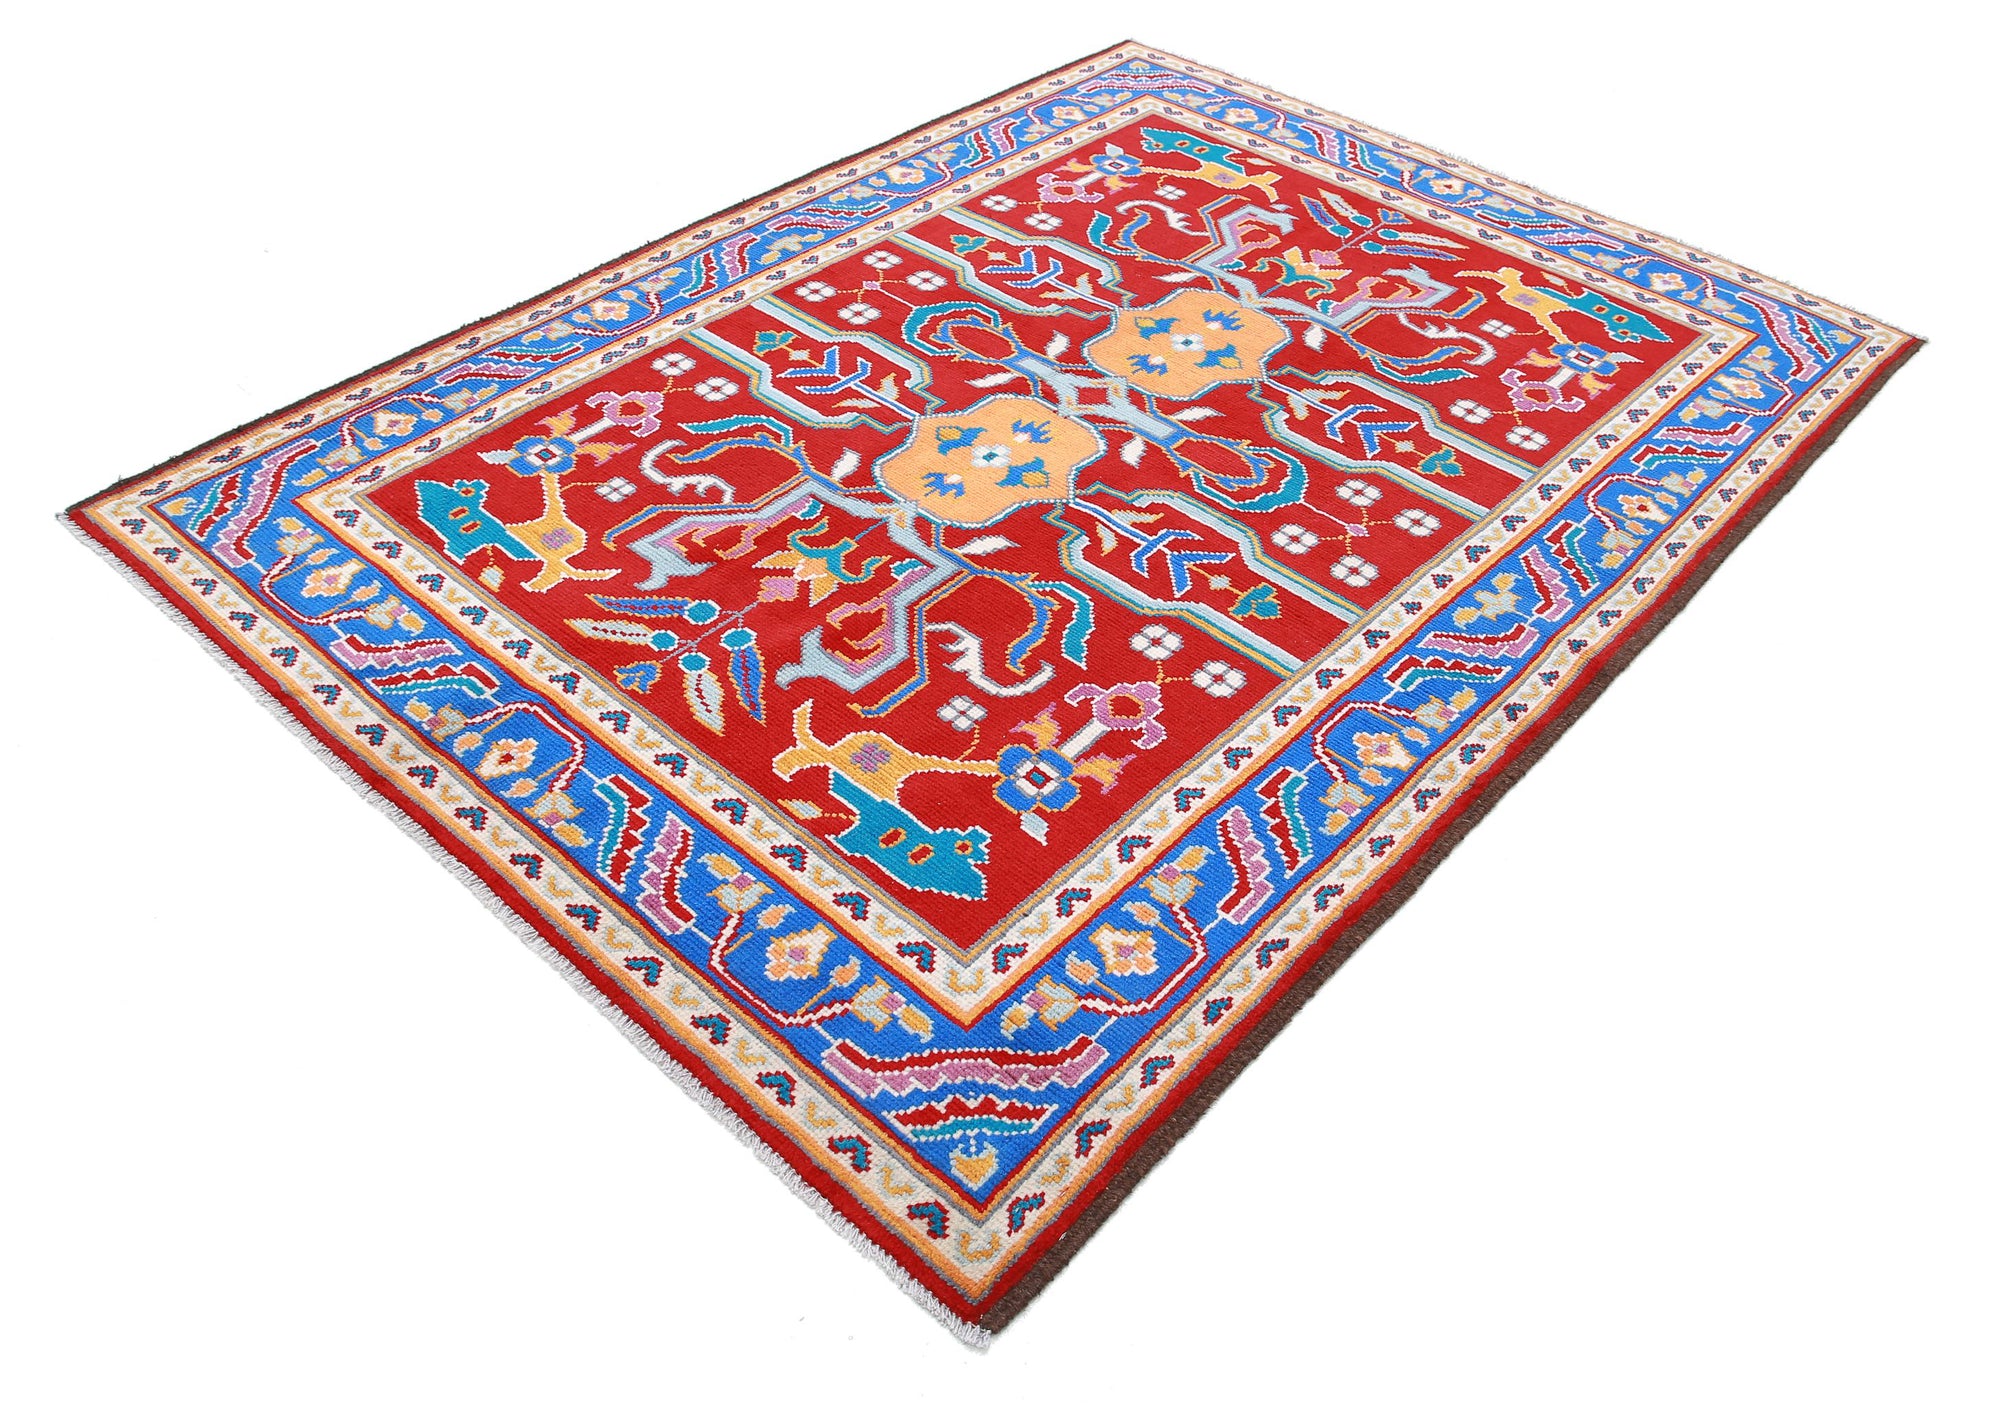 Revival-hand-knotted-qarghani-wool-rug-5014220-2.jpg